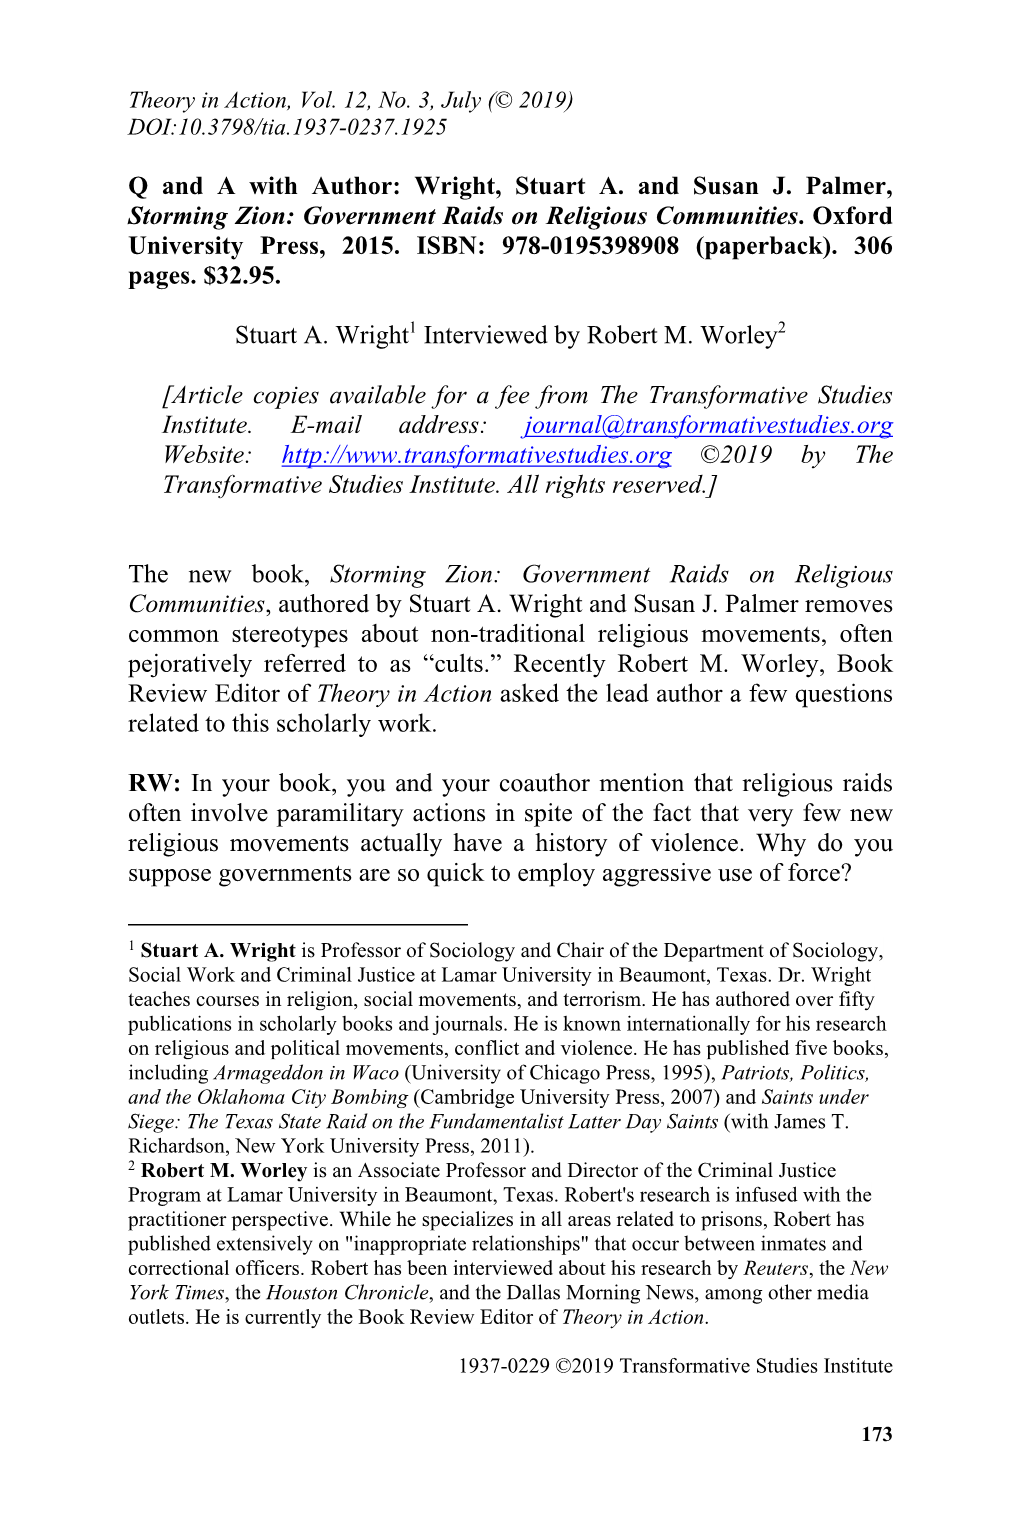 Wright, Stuart A. and Susan J. Palmer, Storming Zion: Government Raids on Religious Communities